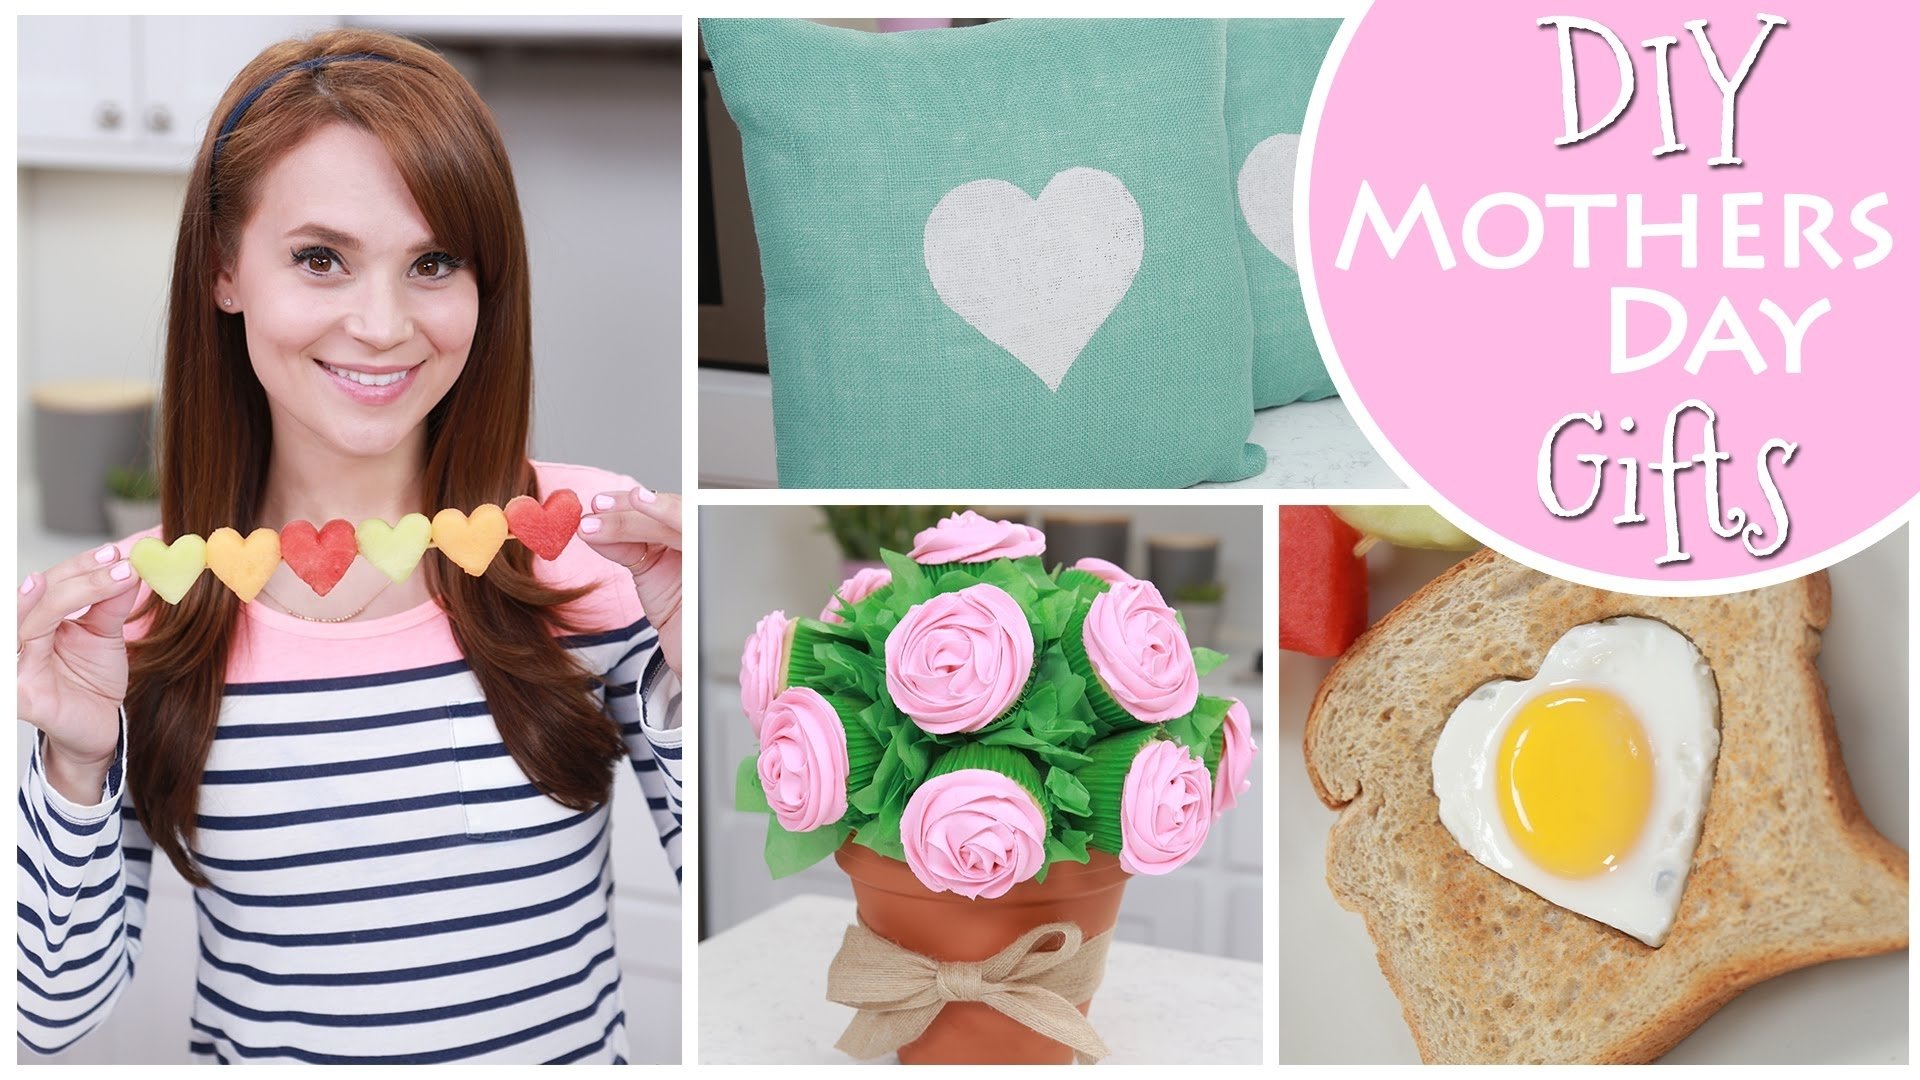 10 Perfect Diy Mother Day Gift Ideas diy mothers day gift ideas youtube 1 2023